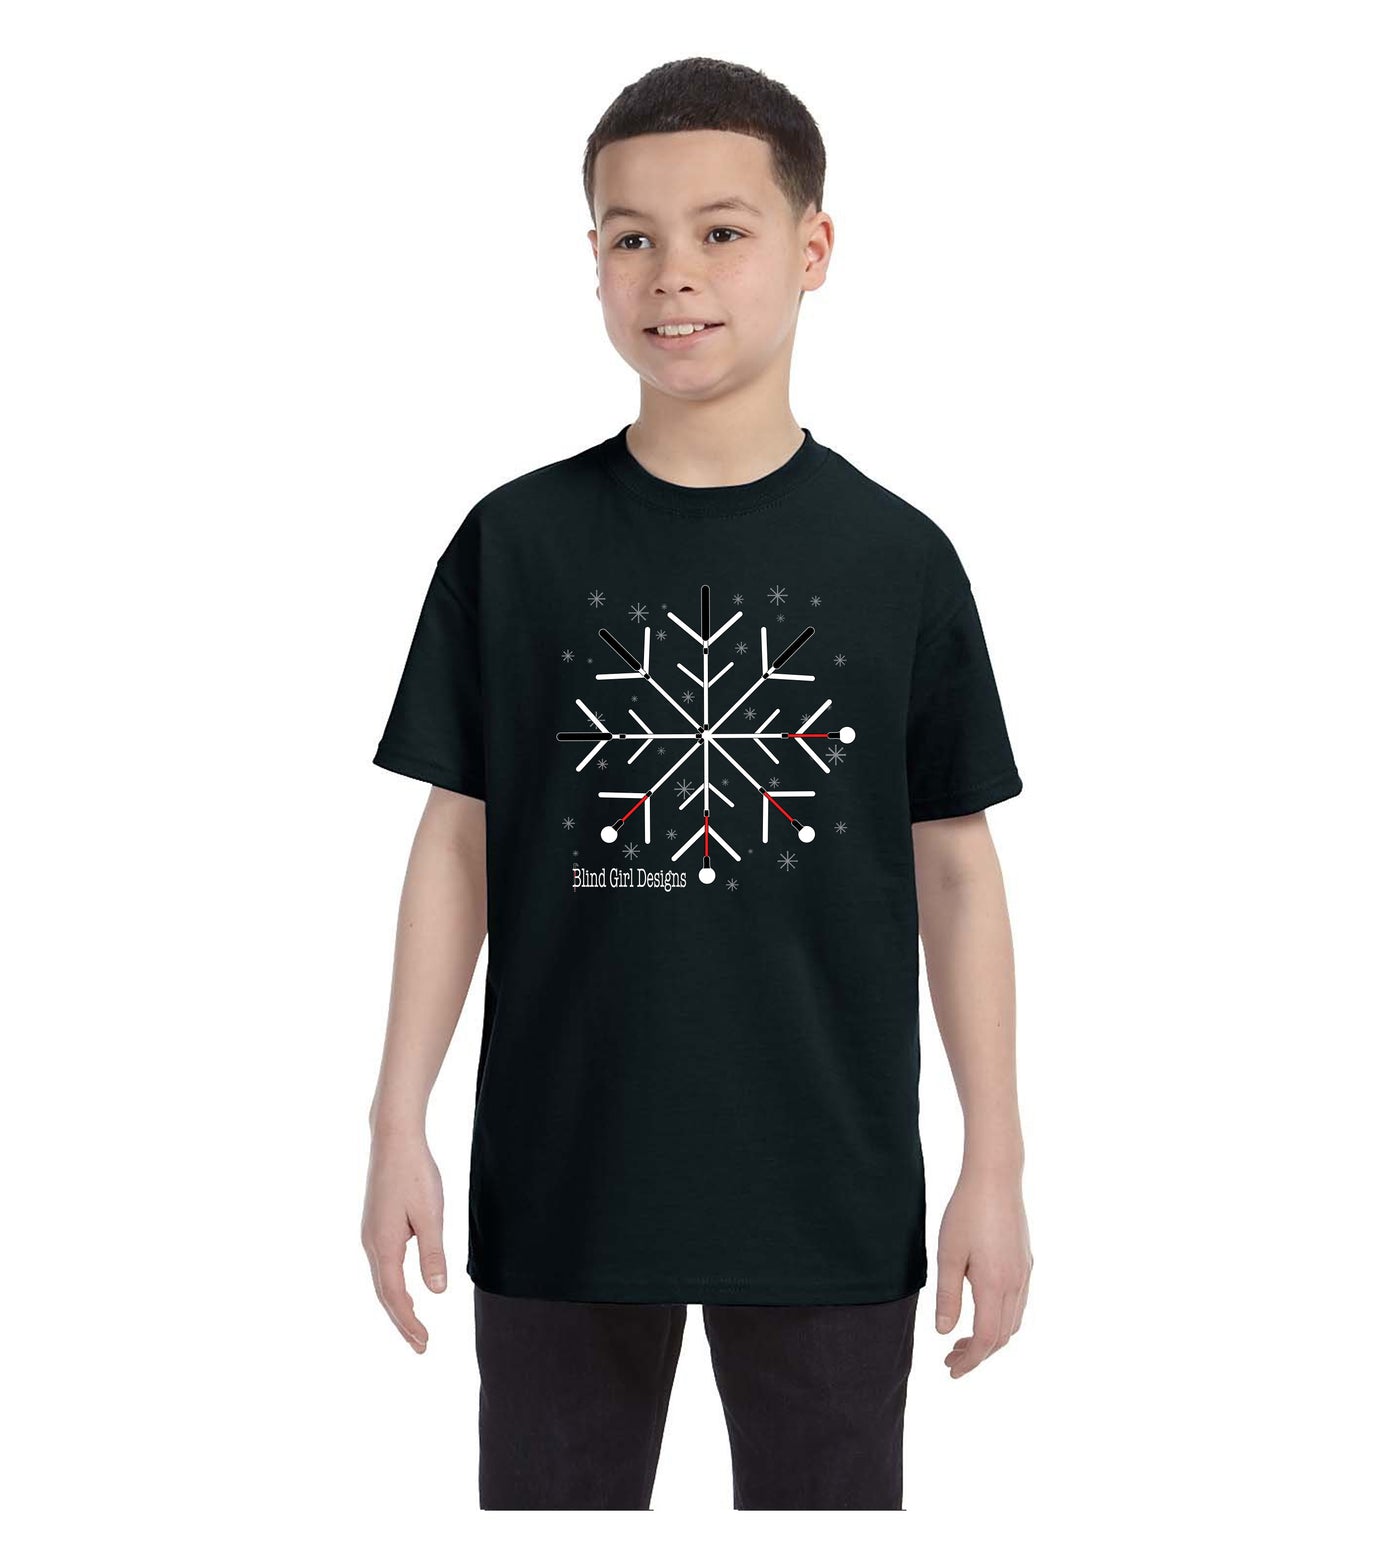 Kids and Toddlers Snowflake White Cane T-Shirt - Black